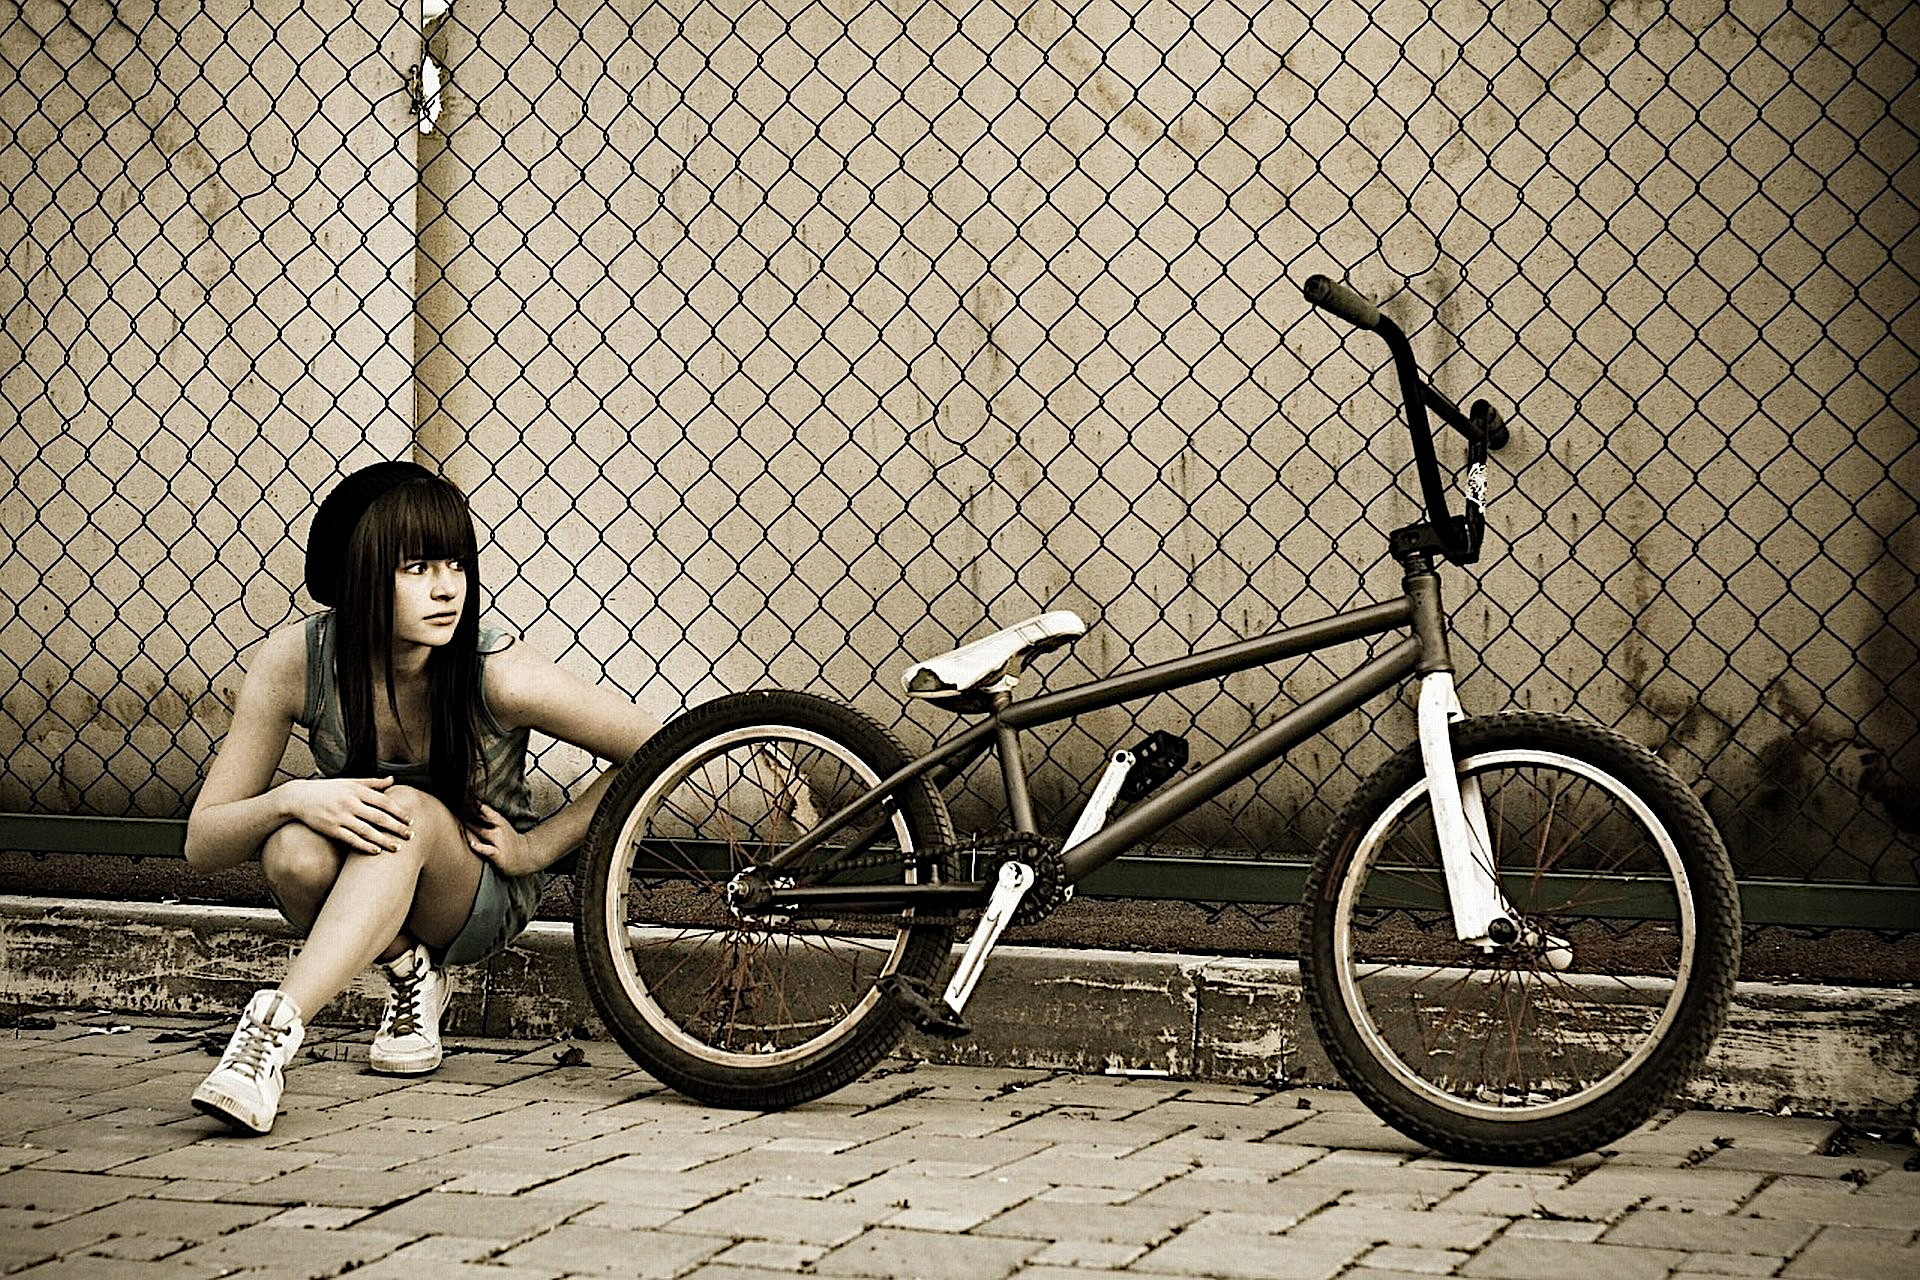 A young girl with a bmx